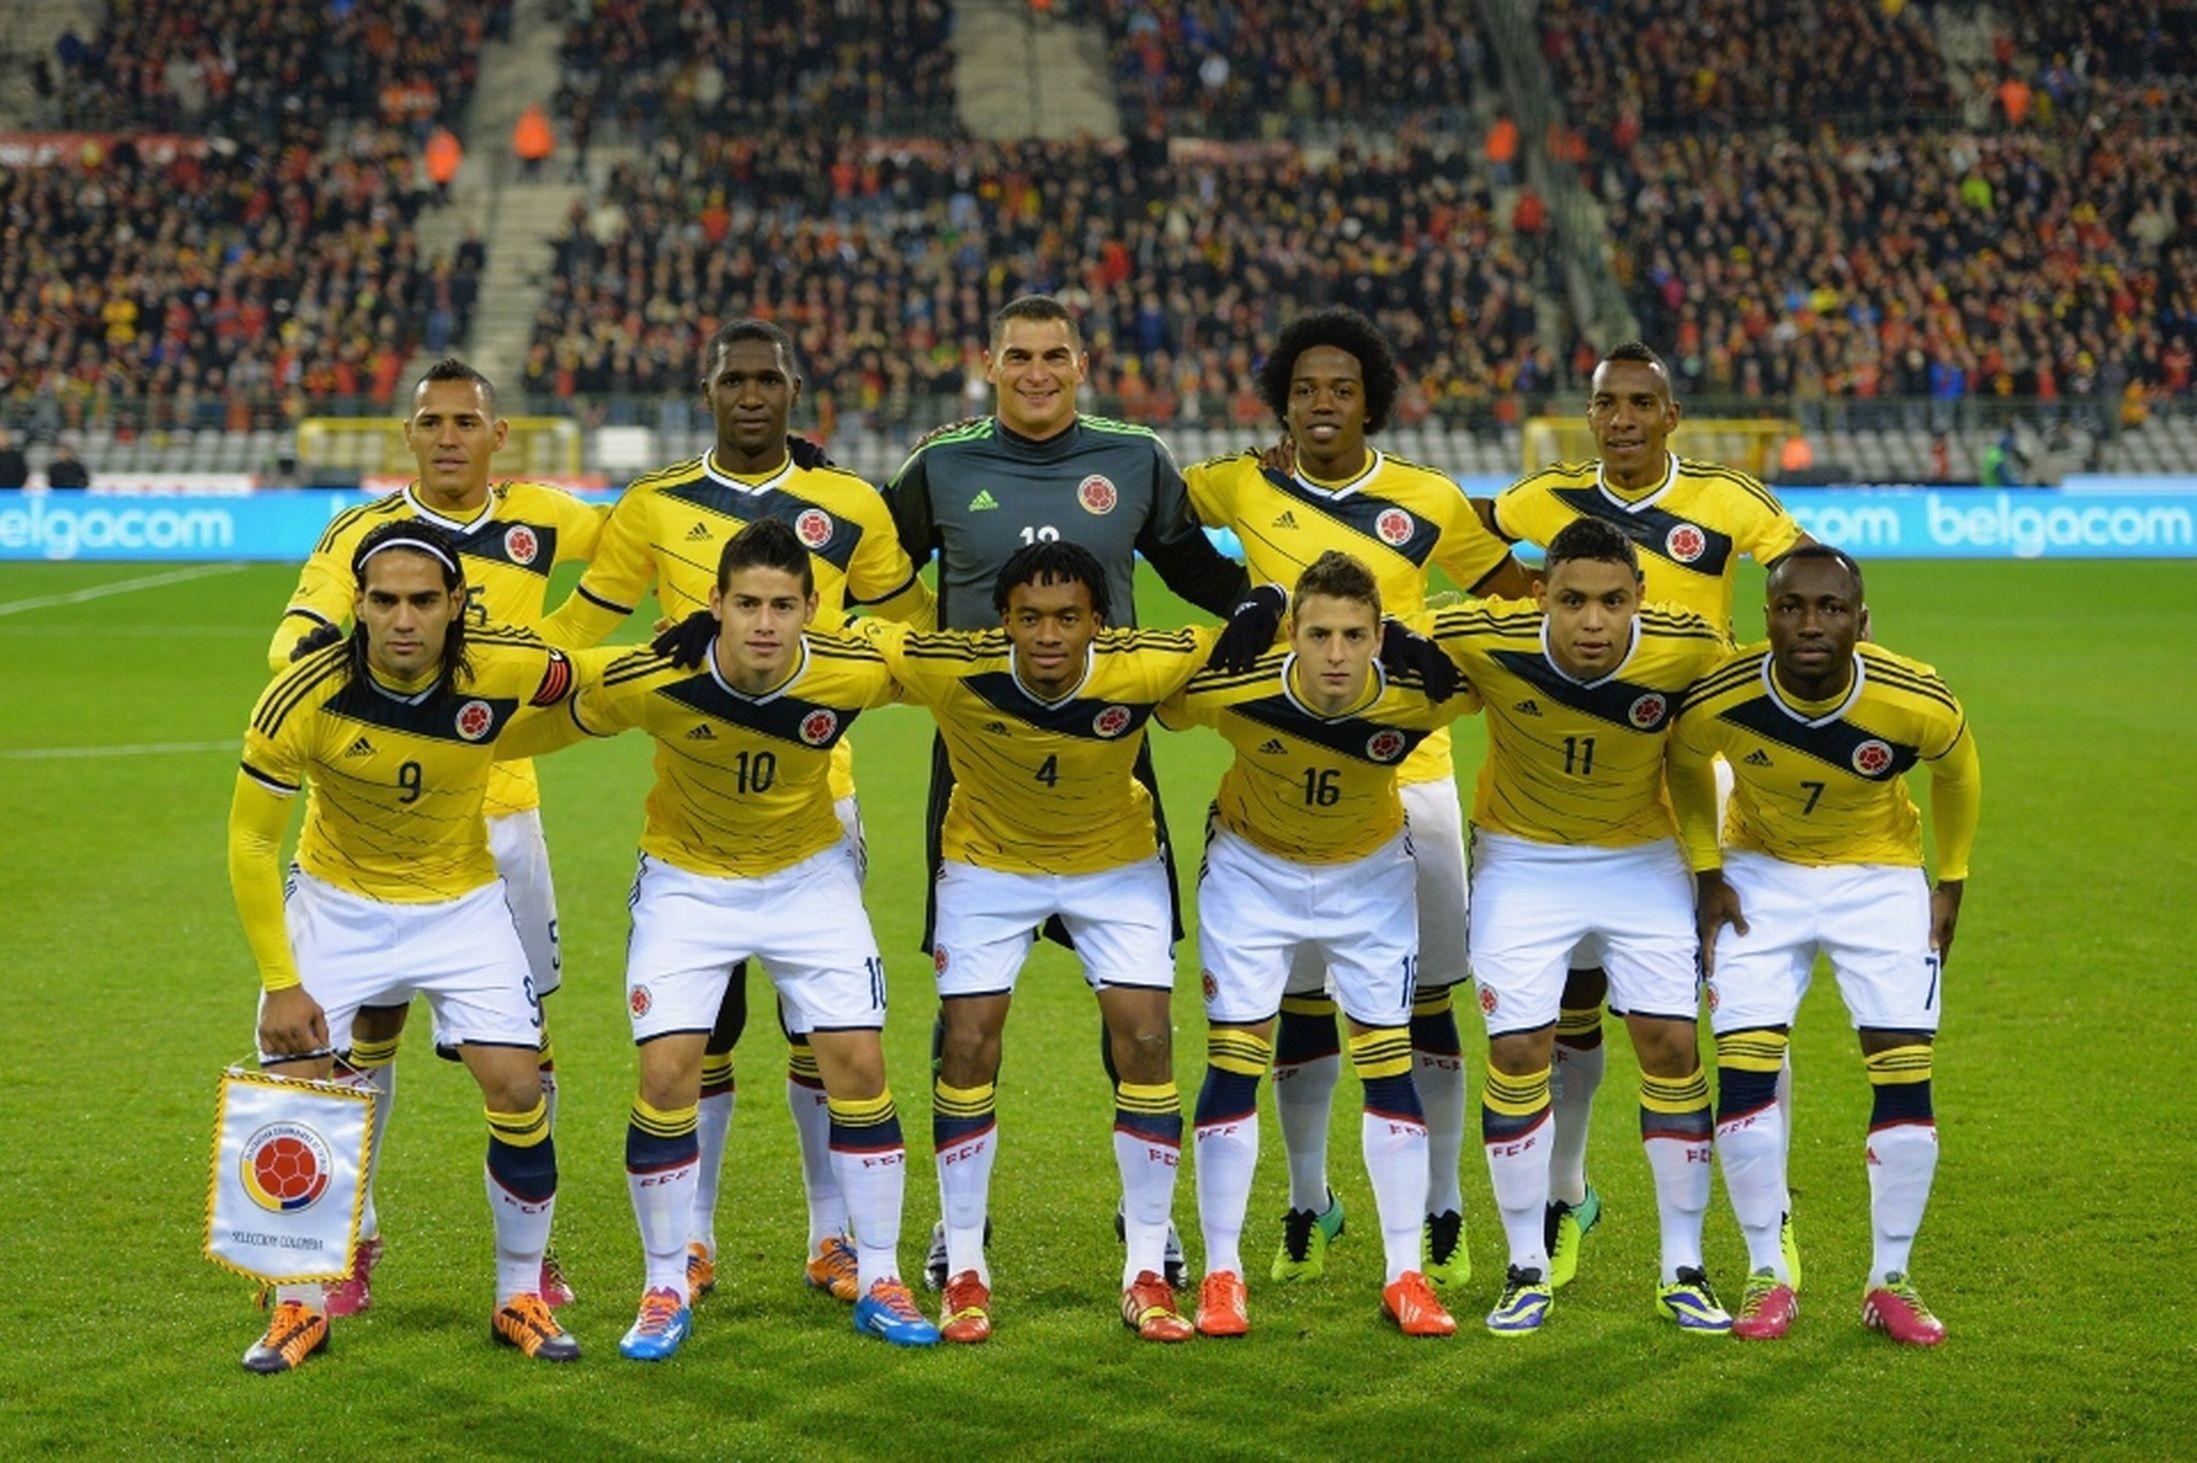 Colombia National Football Team Wallpapers Wallpaper Cave